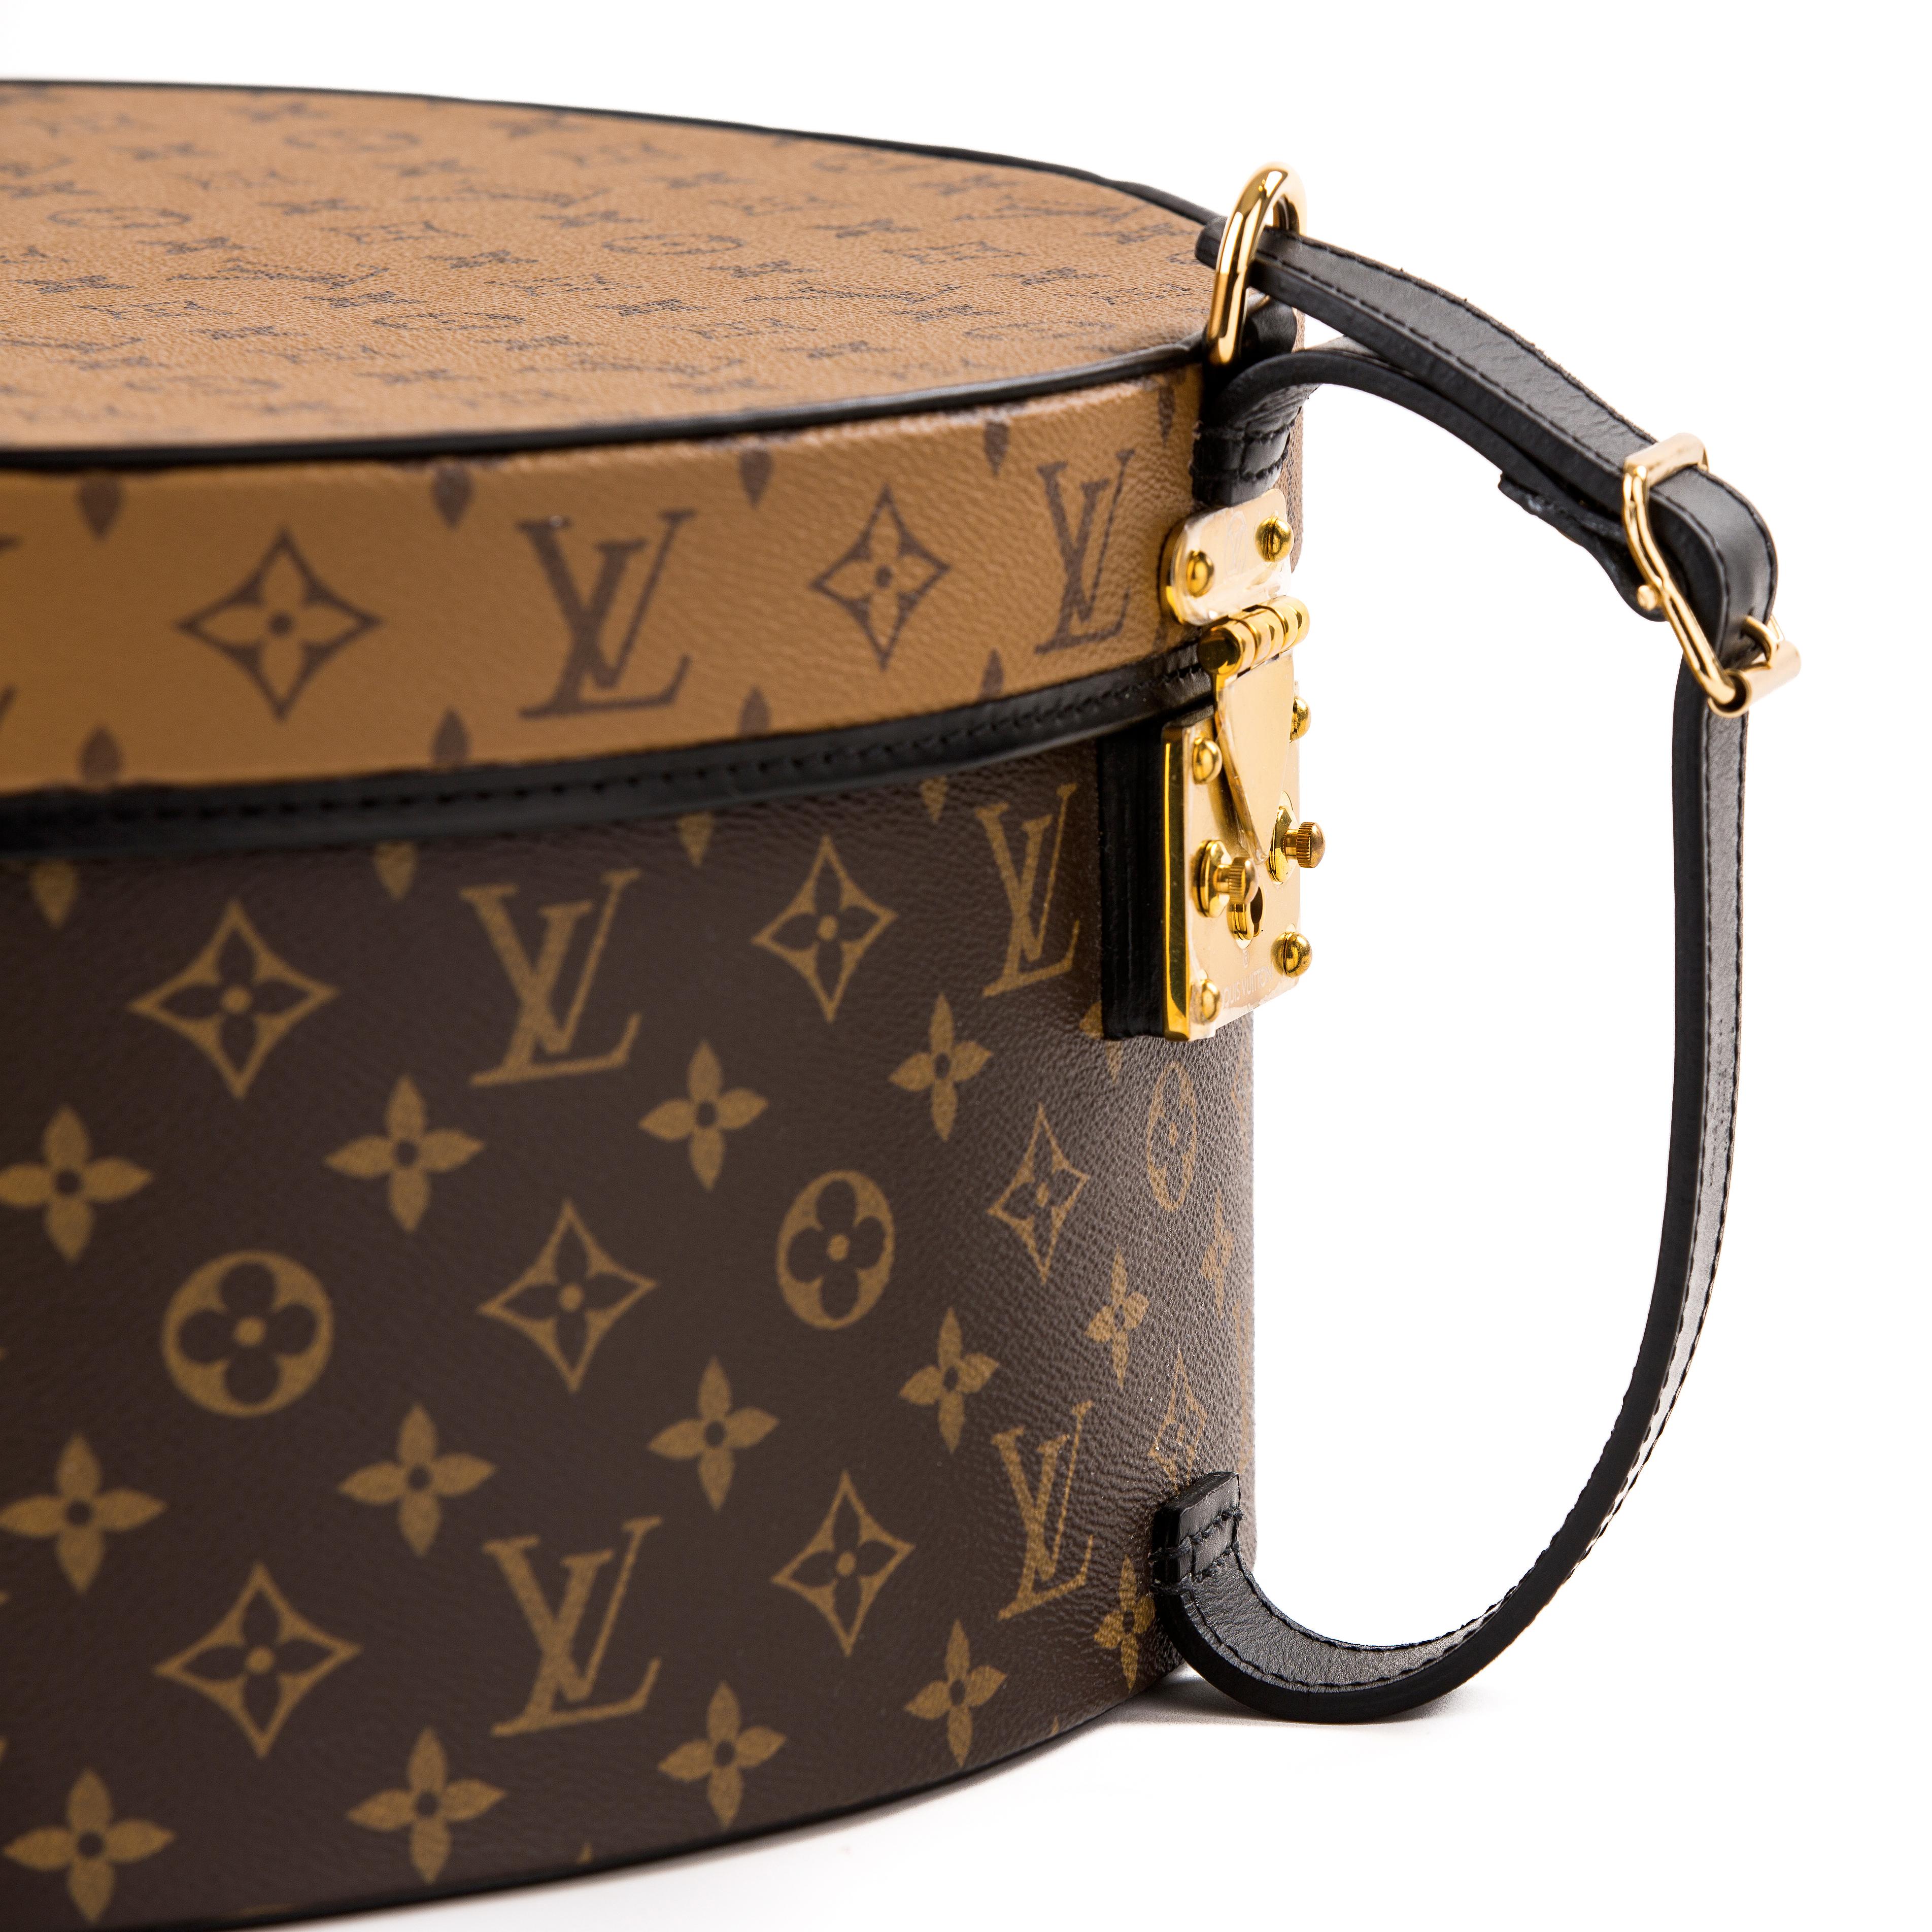 Louis Vuitton Reverse Monogram Hat Box 40 In Excellent Condition For Sale In Double Bay, NSW